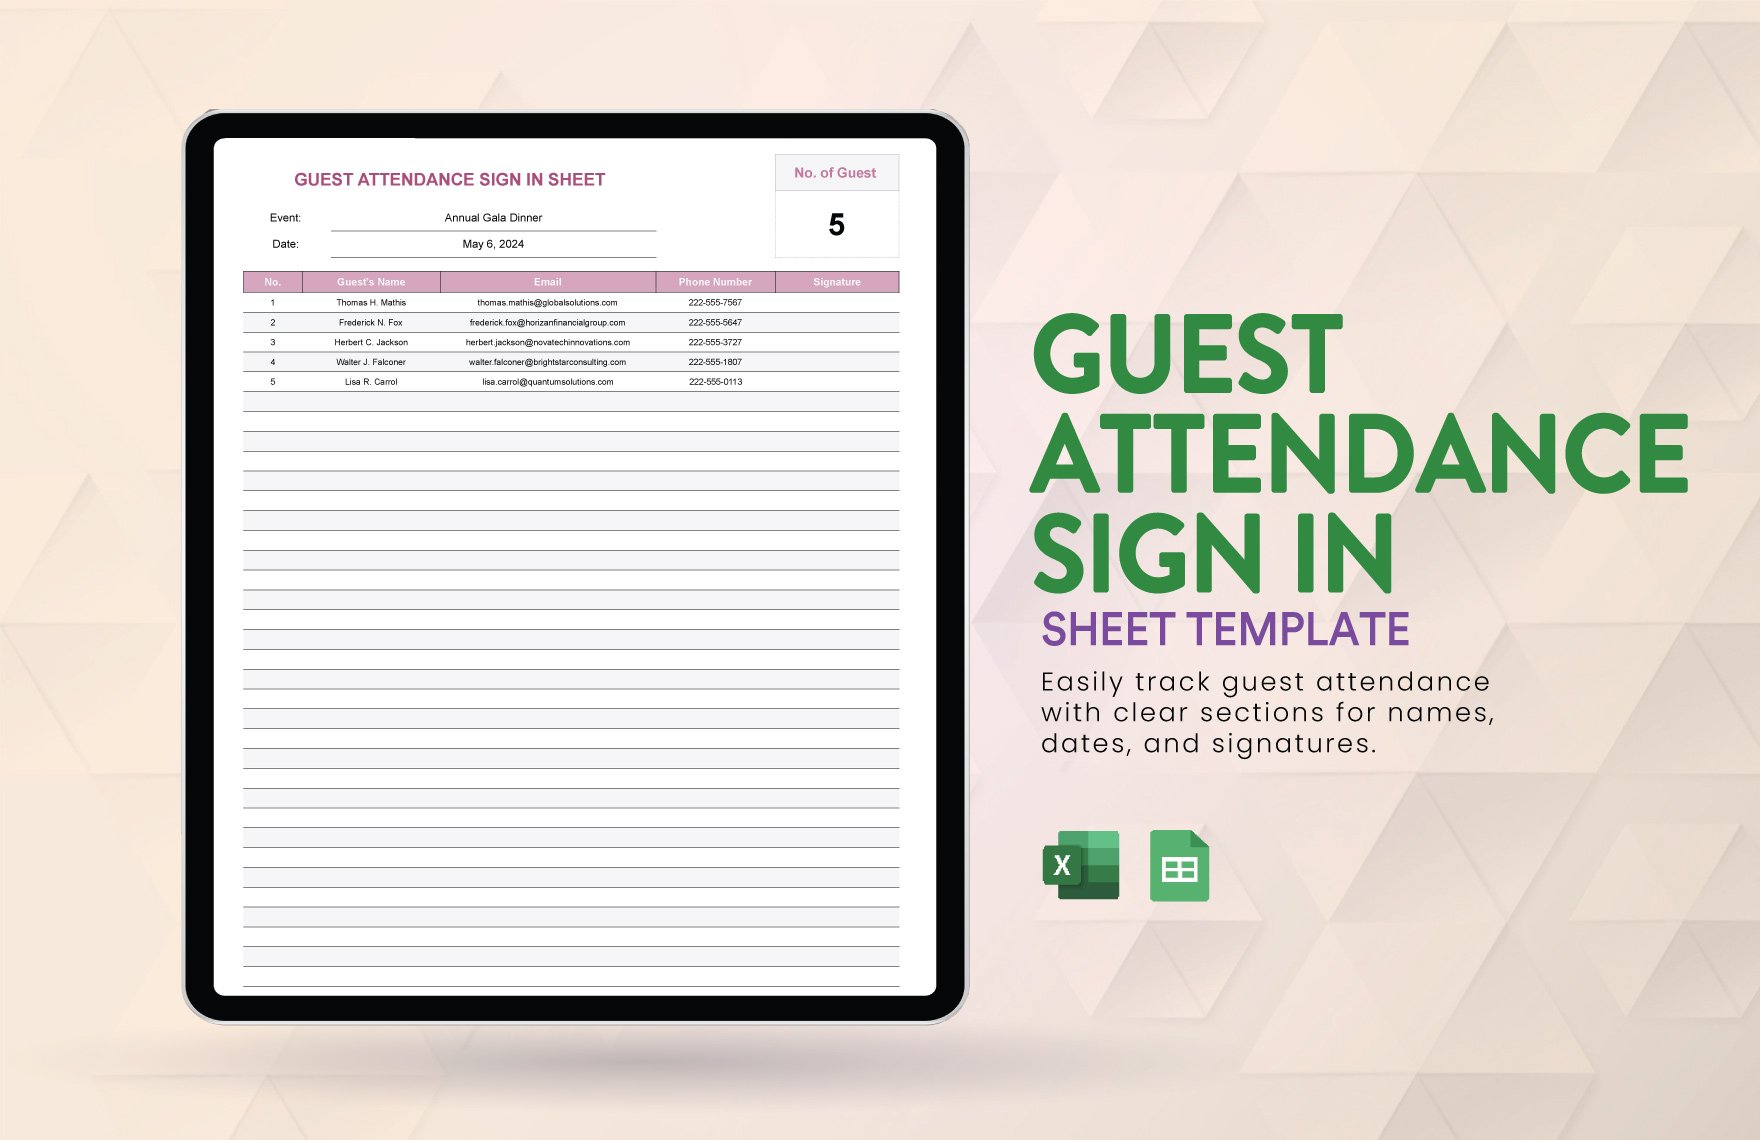 Free Guest Attendance Sign in Sheet Template in Excel, Google Sheets